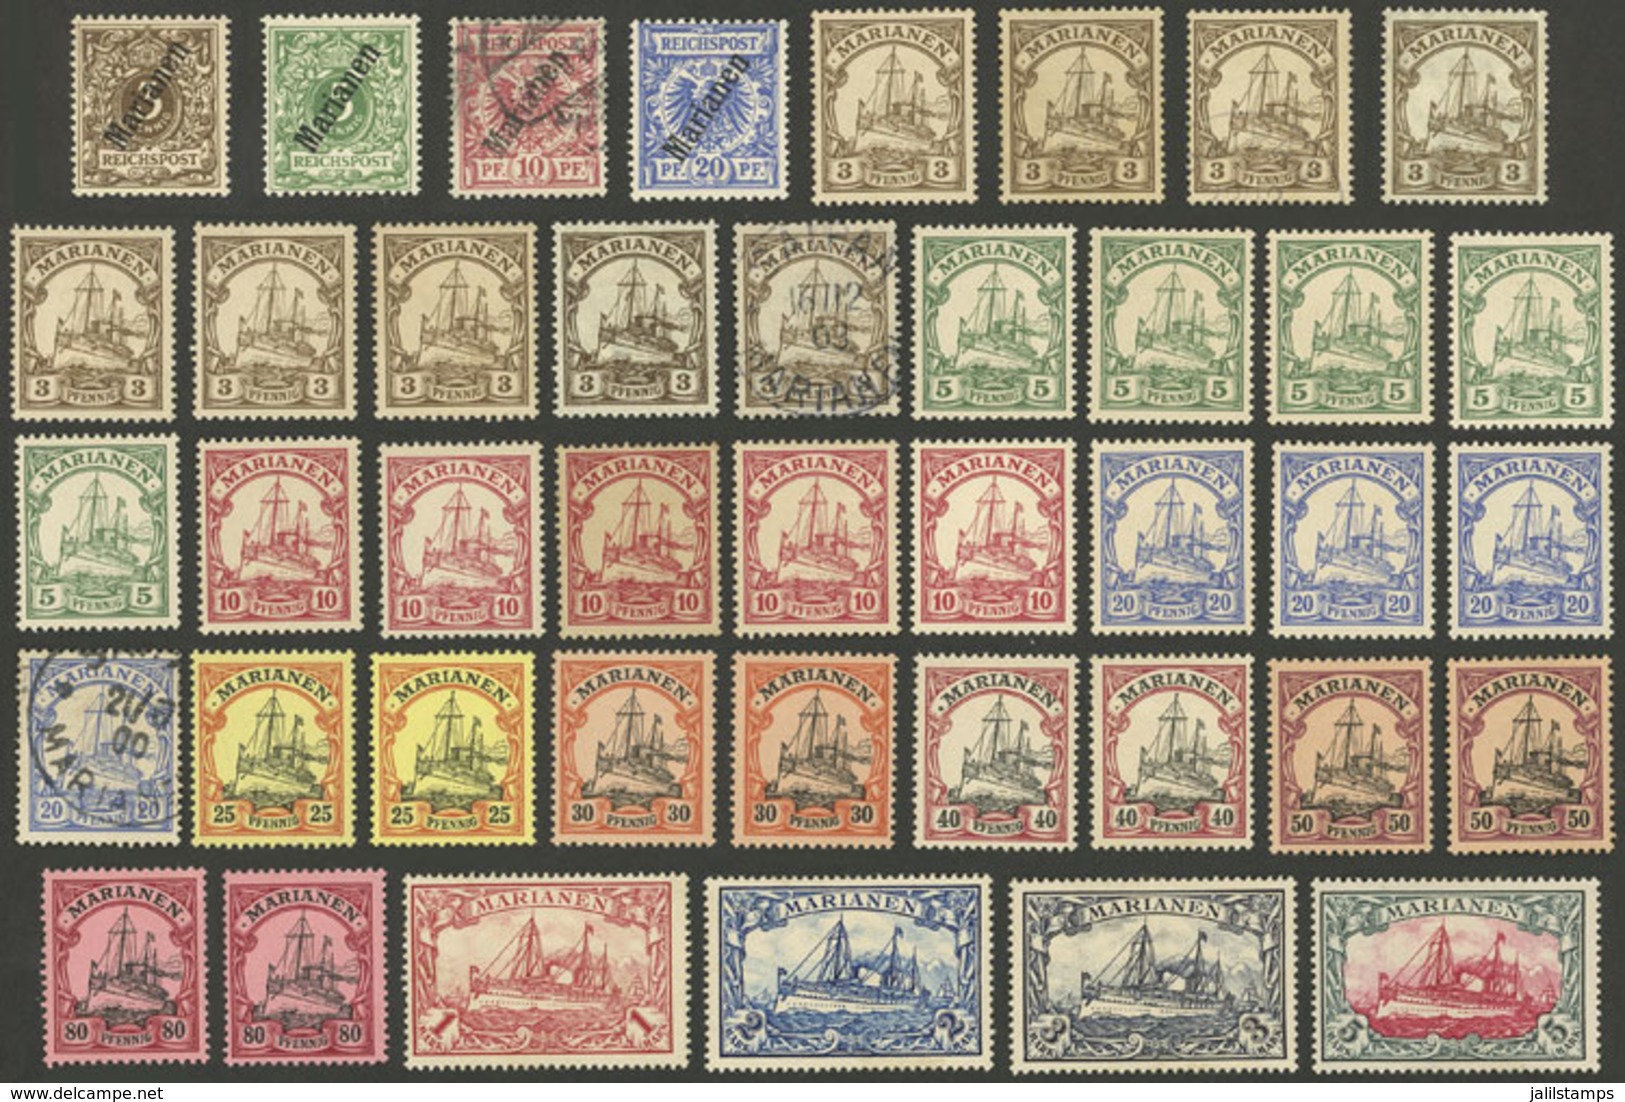 GERMANY - MARIANA ISLANDS: Lot Of Old Stamps, Most Of Fine To VF Quality, Good Opportunity! - Mariana Islands